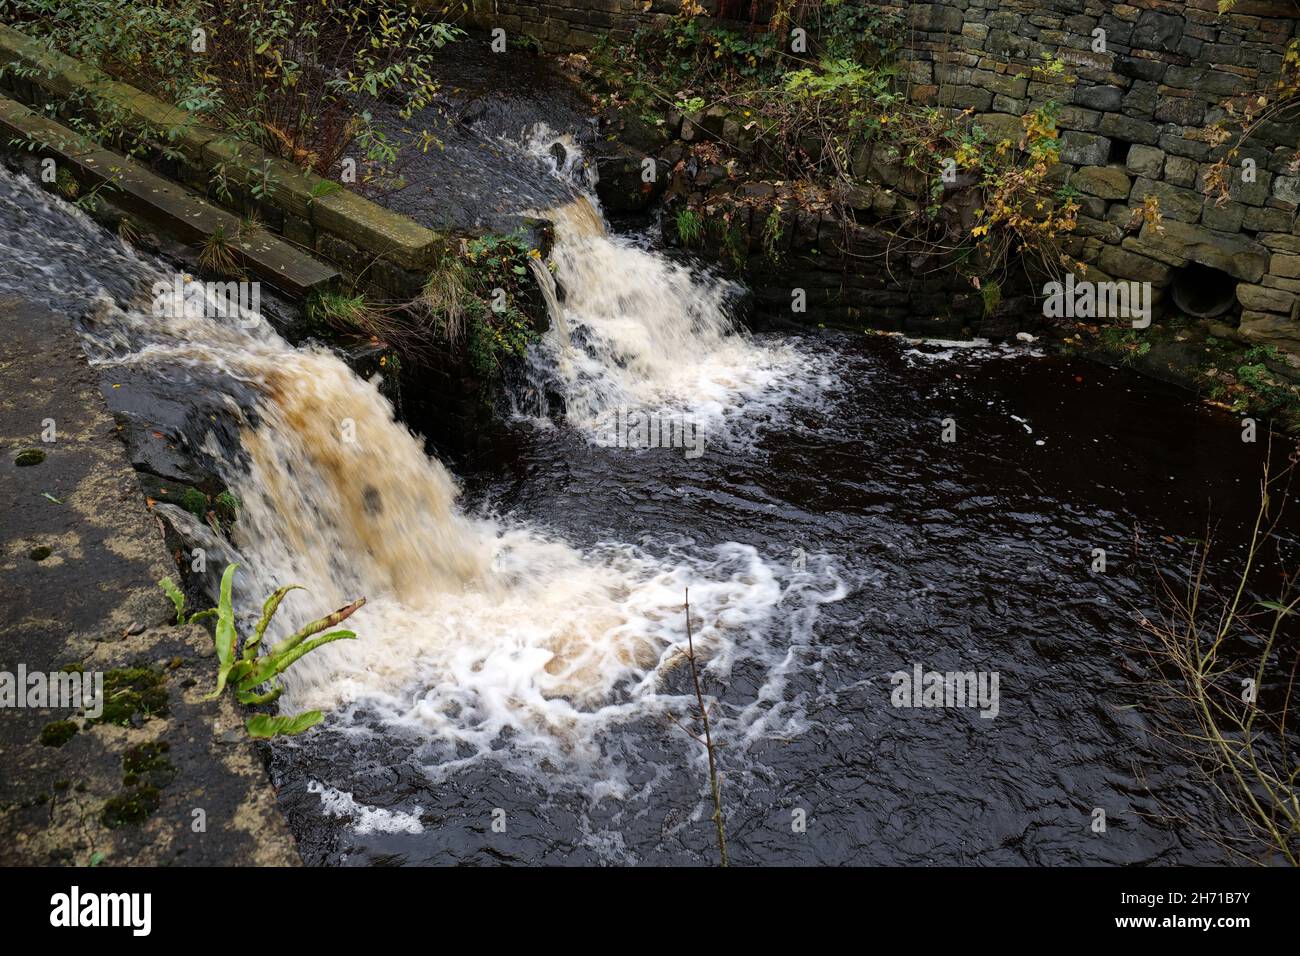 Two small water falls weirs stone banks and centre channel white water Stock Photo